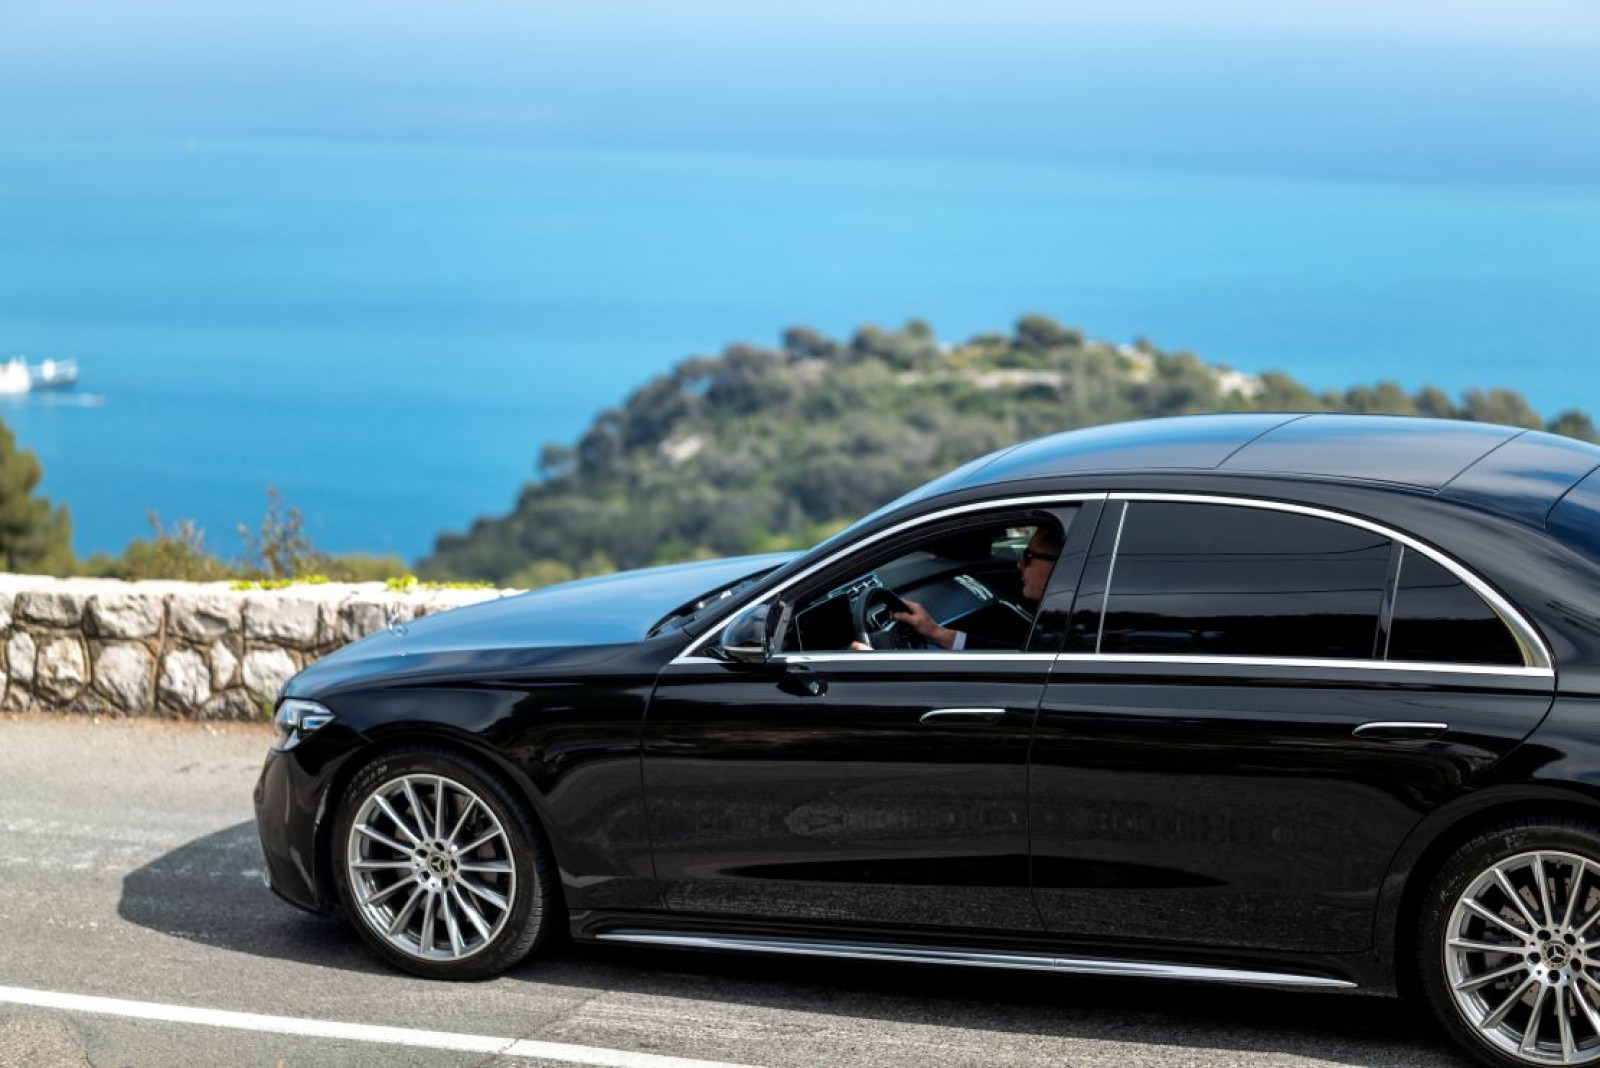 Limo Service with Private Driver in Nice - 24/7 Service -  VIP Limousine Service - Book Online - Tailor-Made Quote 